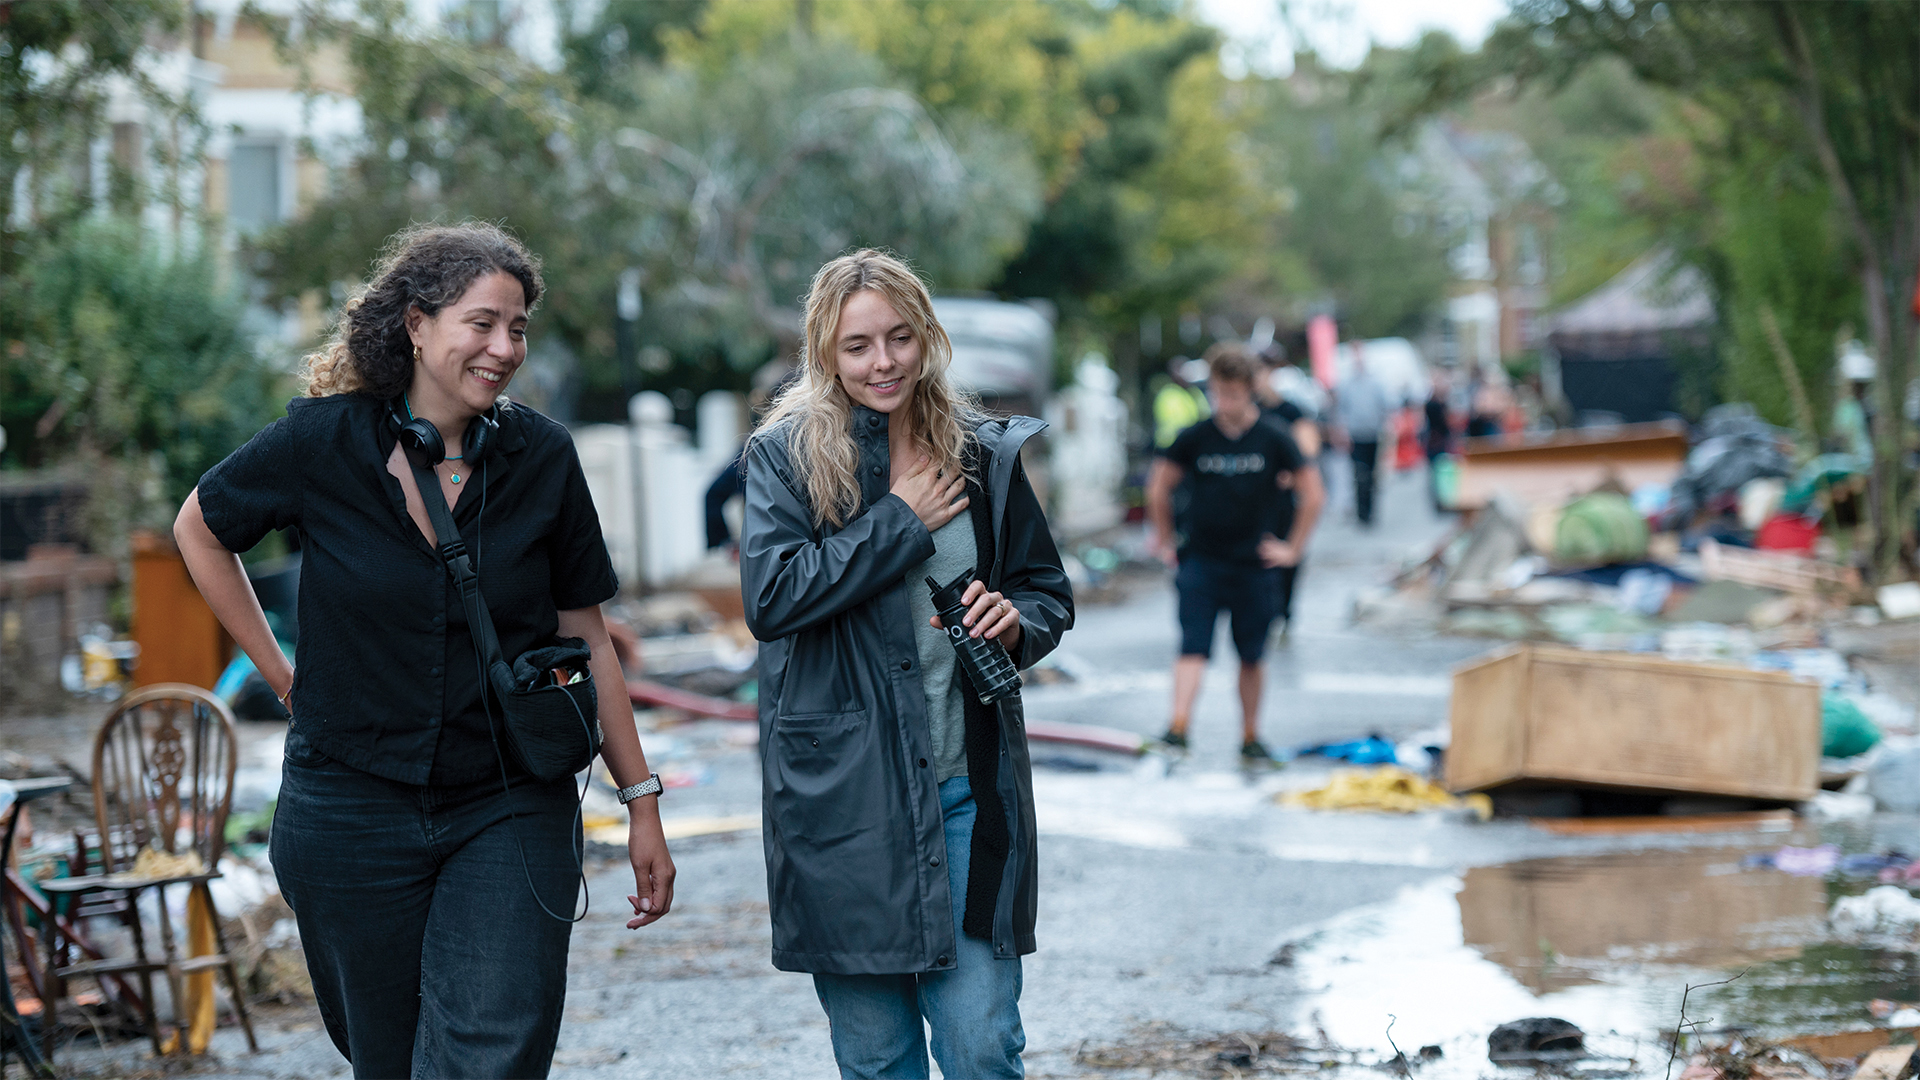 Jodie Comer on the set of The End We Start From with director Mahalia Belo